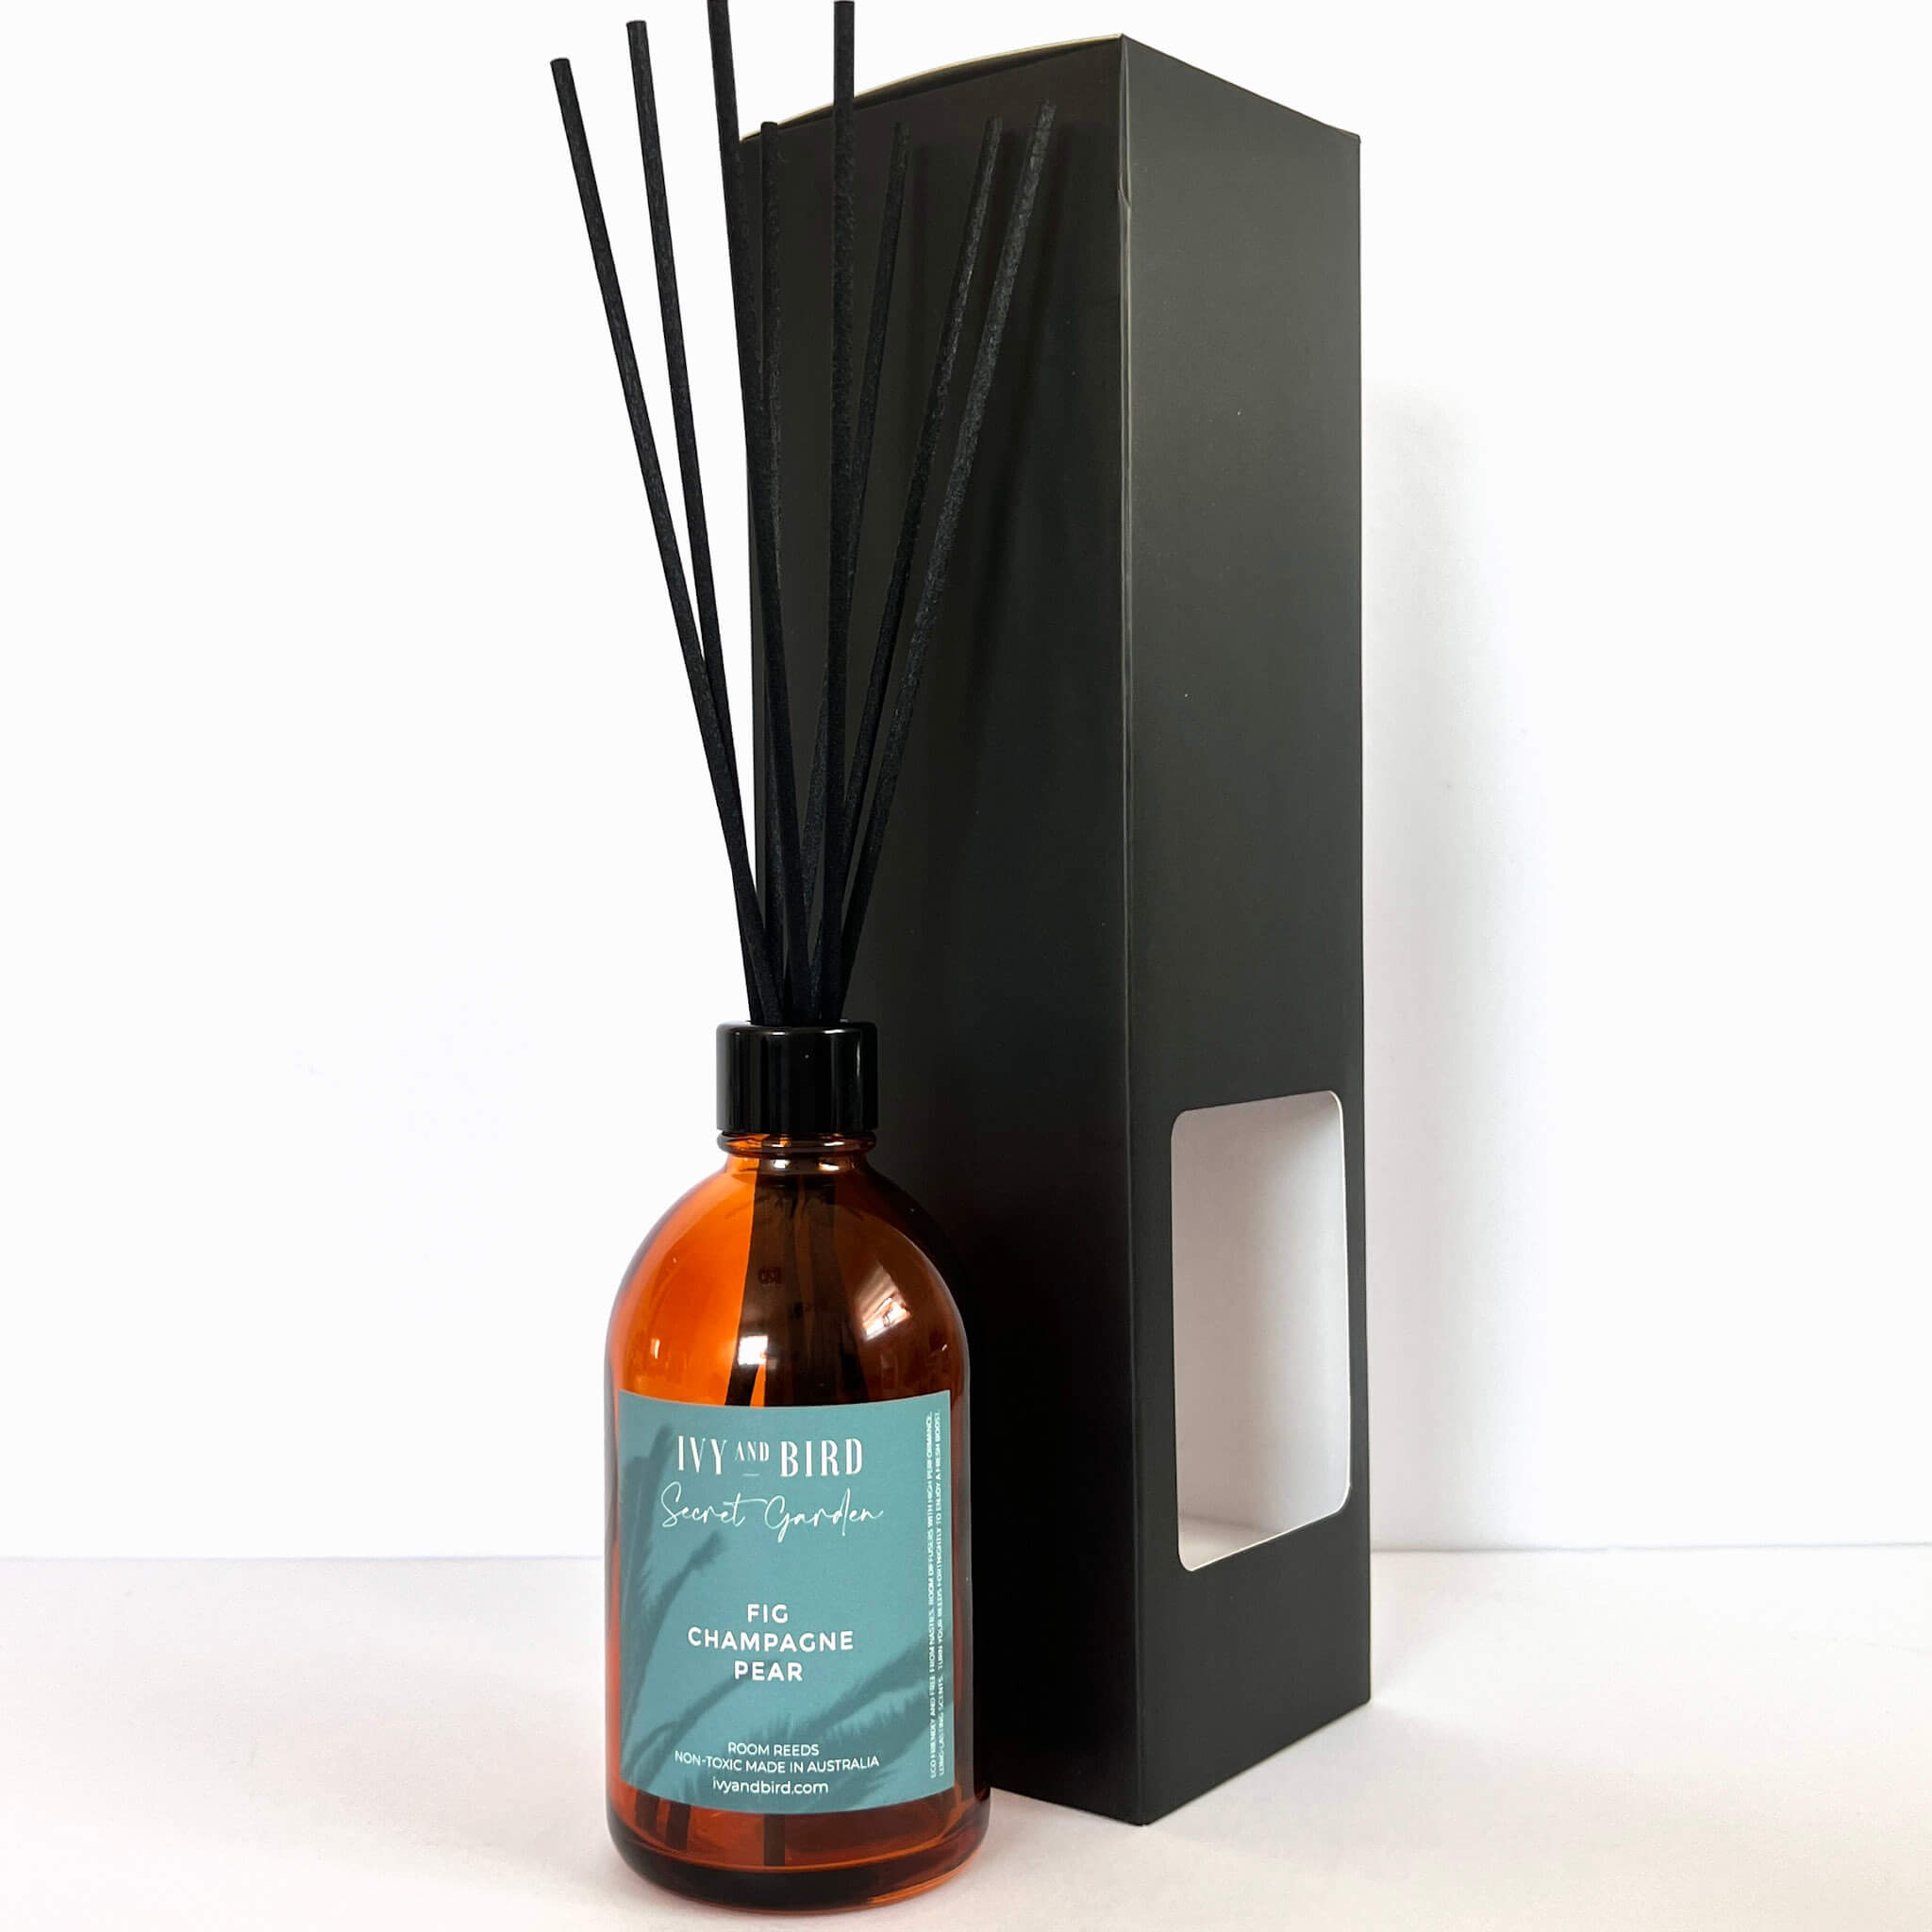 FIG CHAMPAGNE + PEAR {SECRET GARDEN} REED DIFFUSER